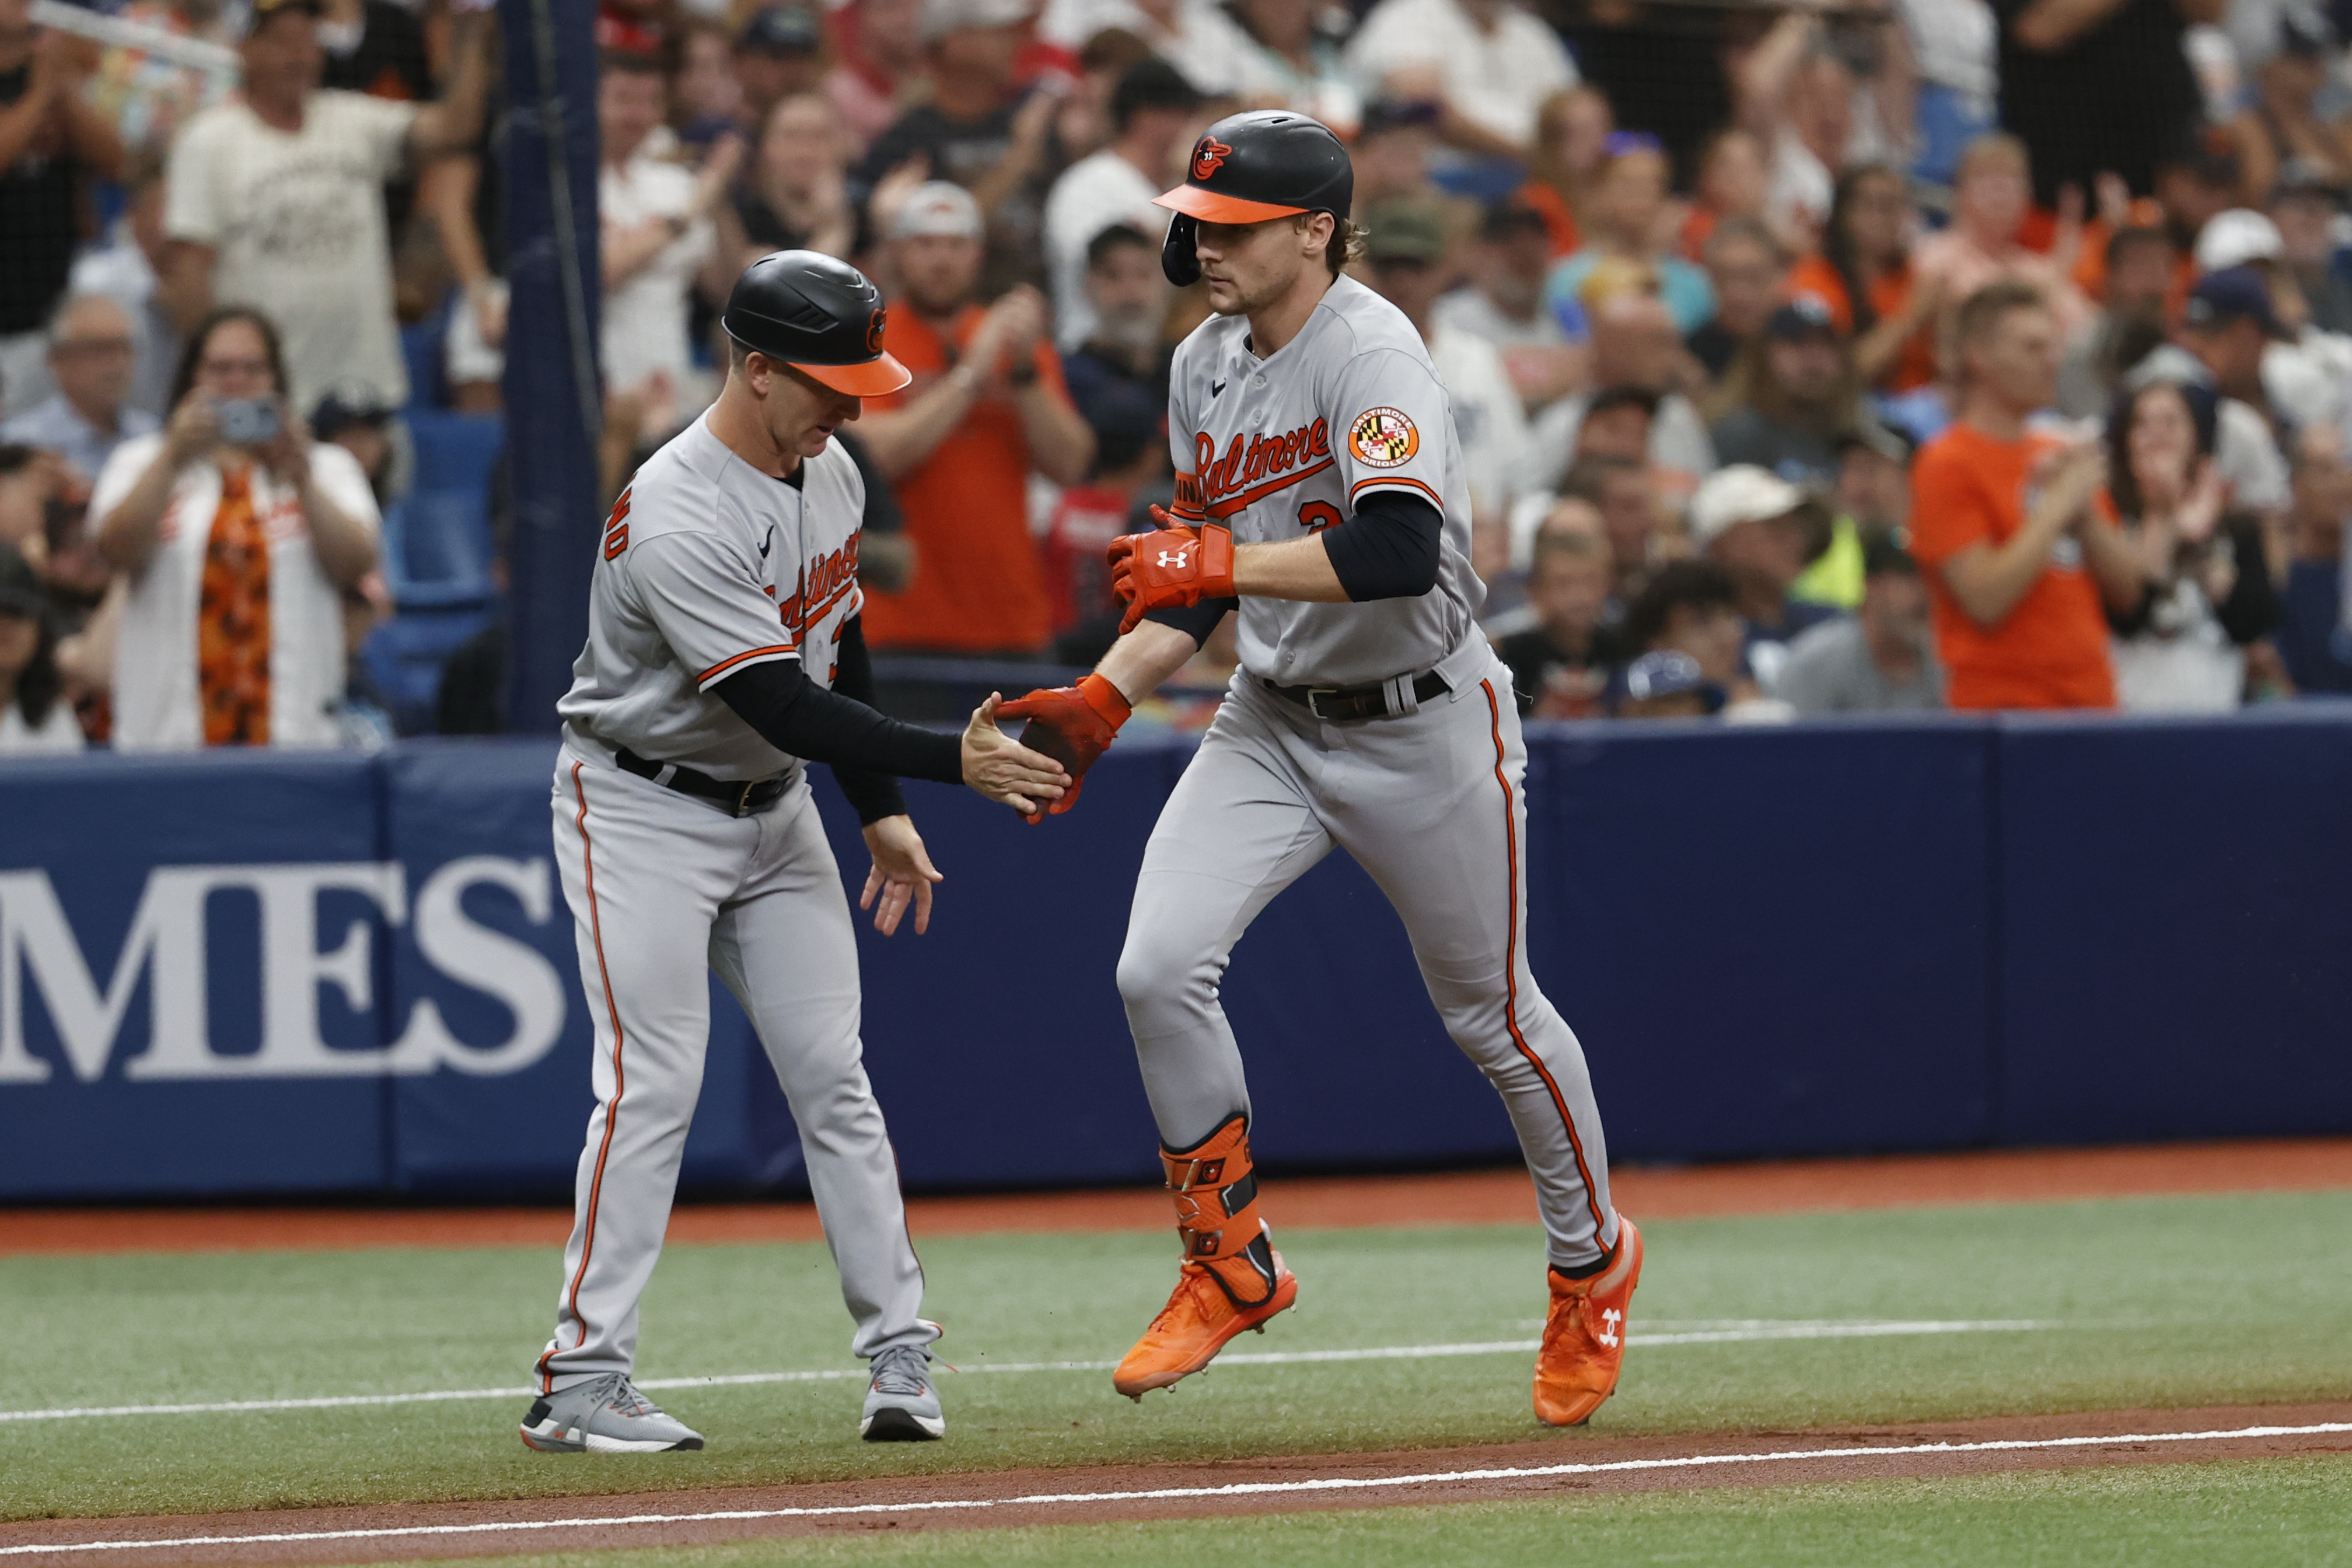 Orioles reset: Baltimore leaves impression on Rays after taking